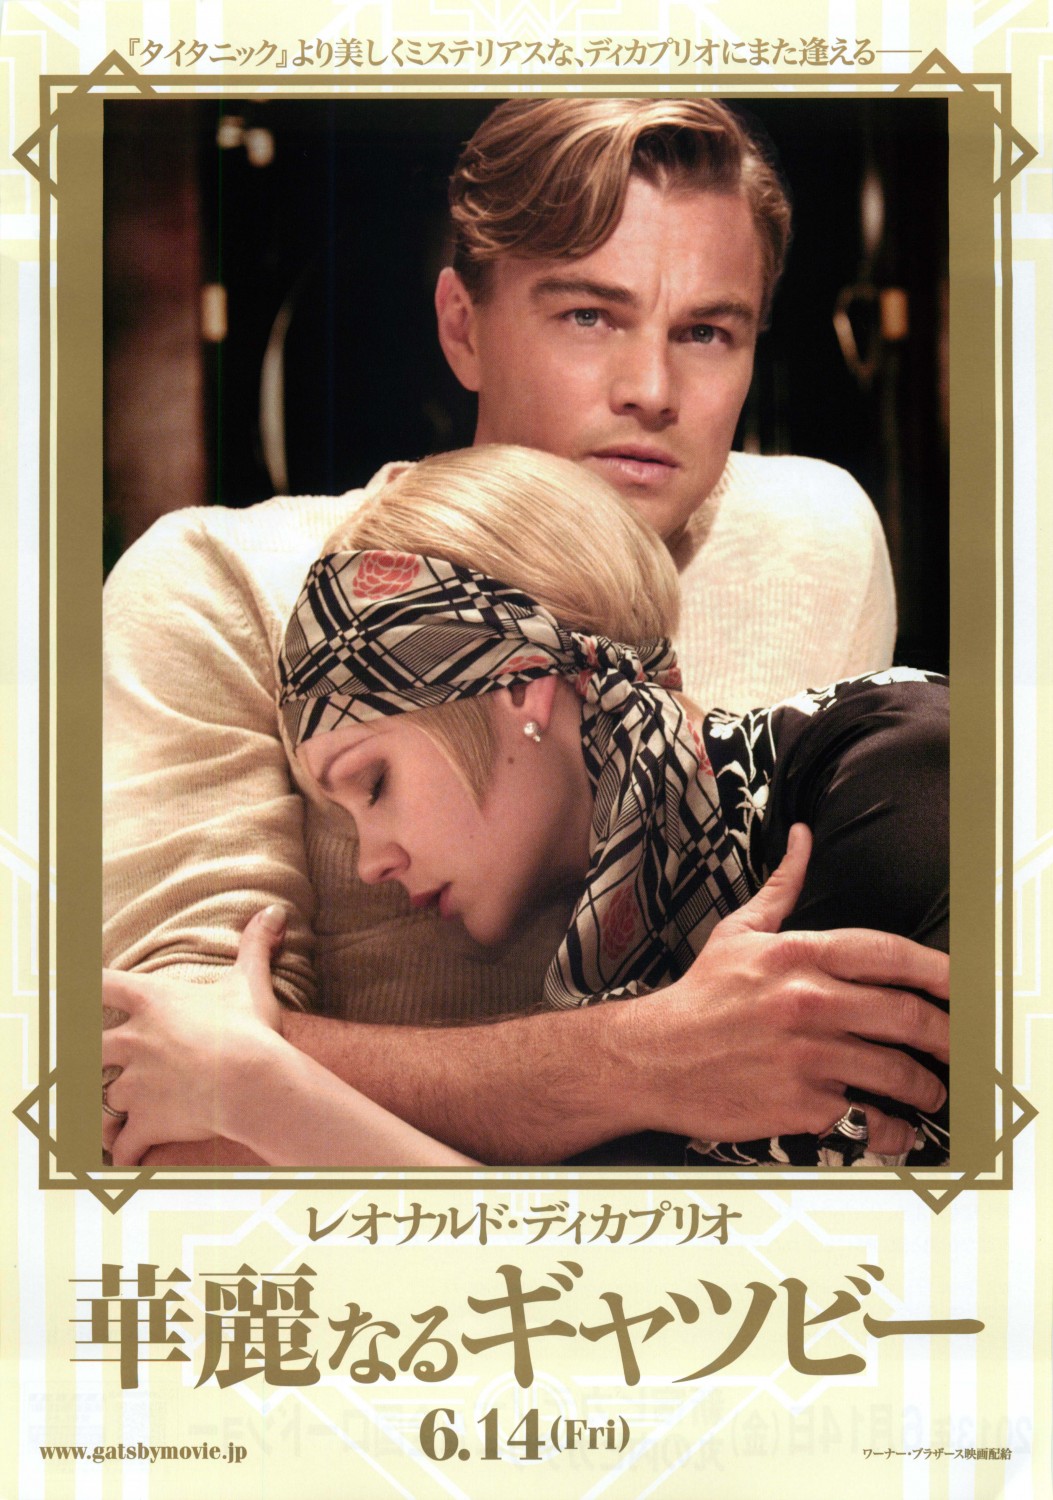 Extra Large Movie Poster Image for The Great Gatsby (#8 of 24)